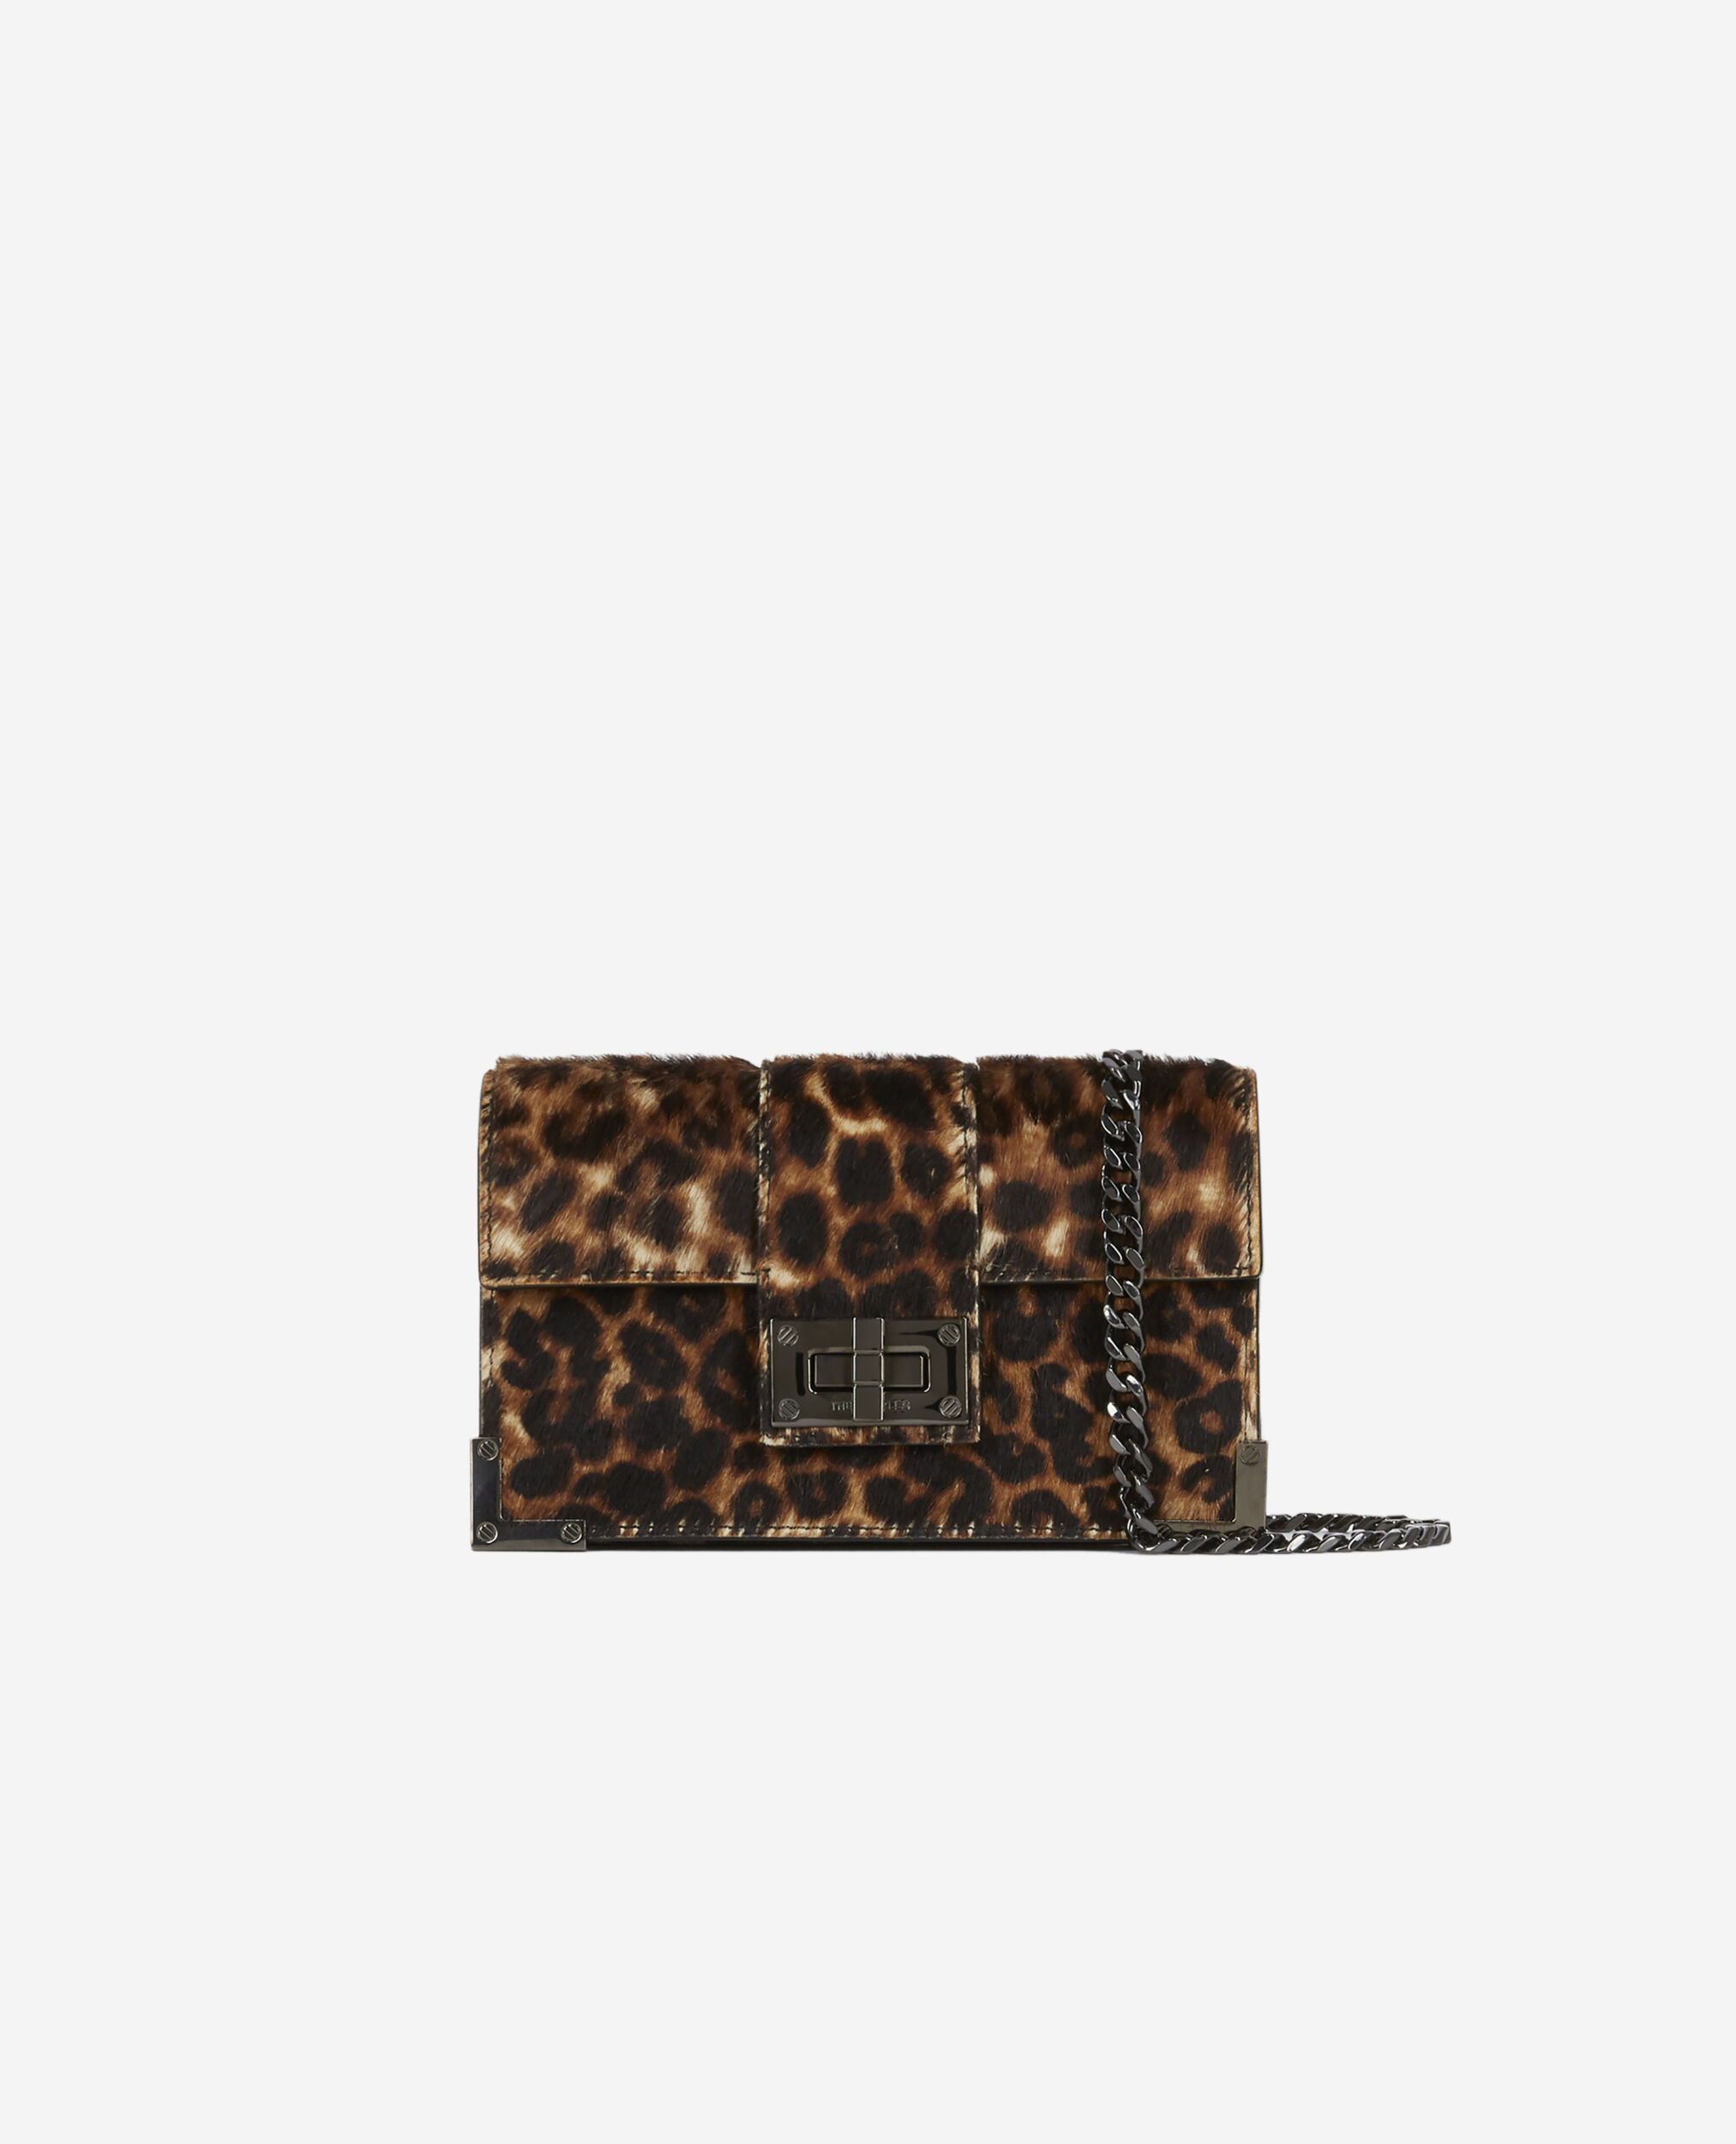 Small Emily pouch in leopard print leather, LEOPARD, hi-res image number null